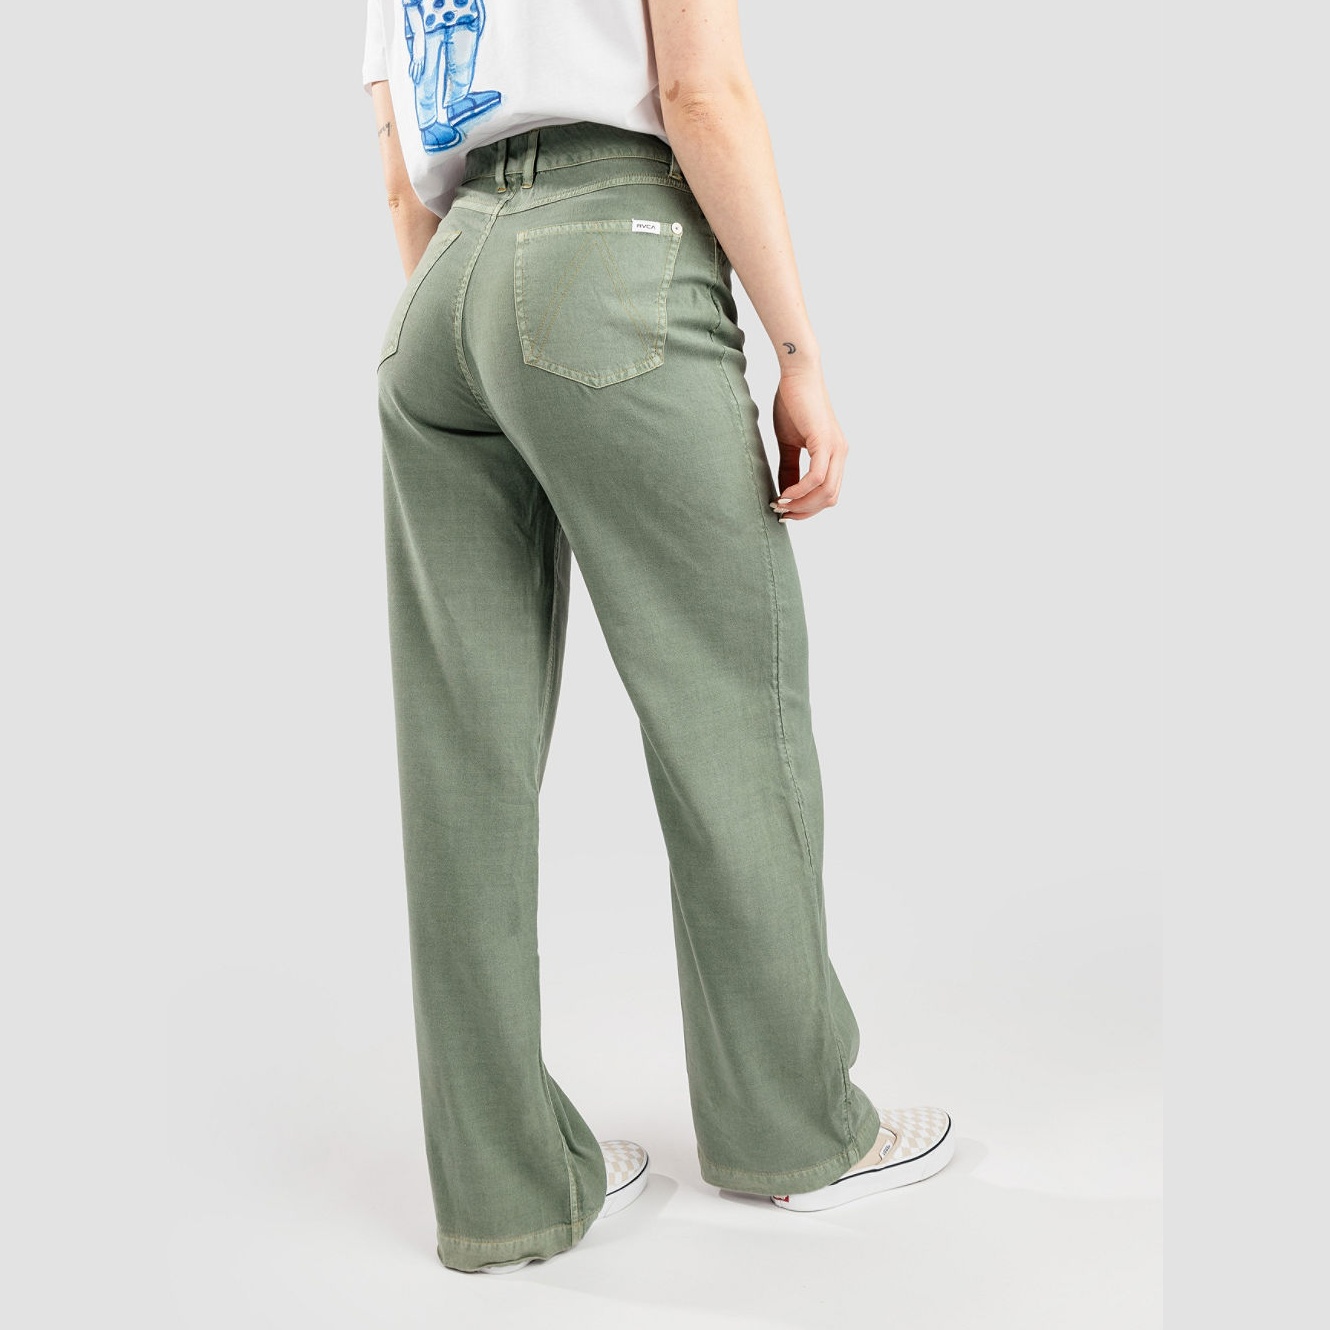 Rvca Coco Jade Jeans Femme vue2